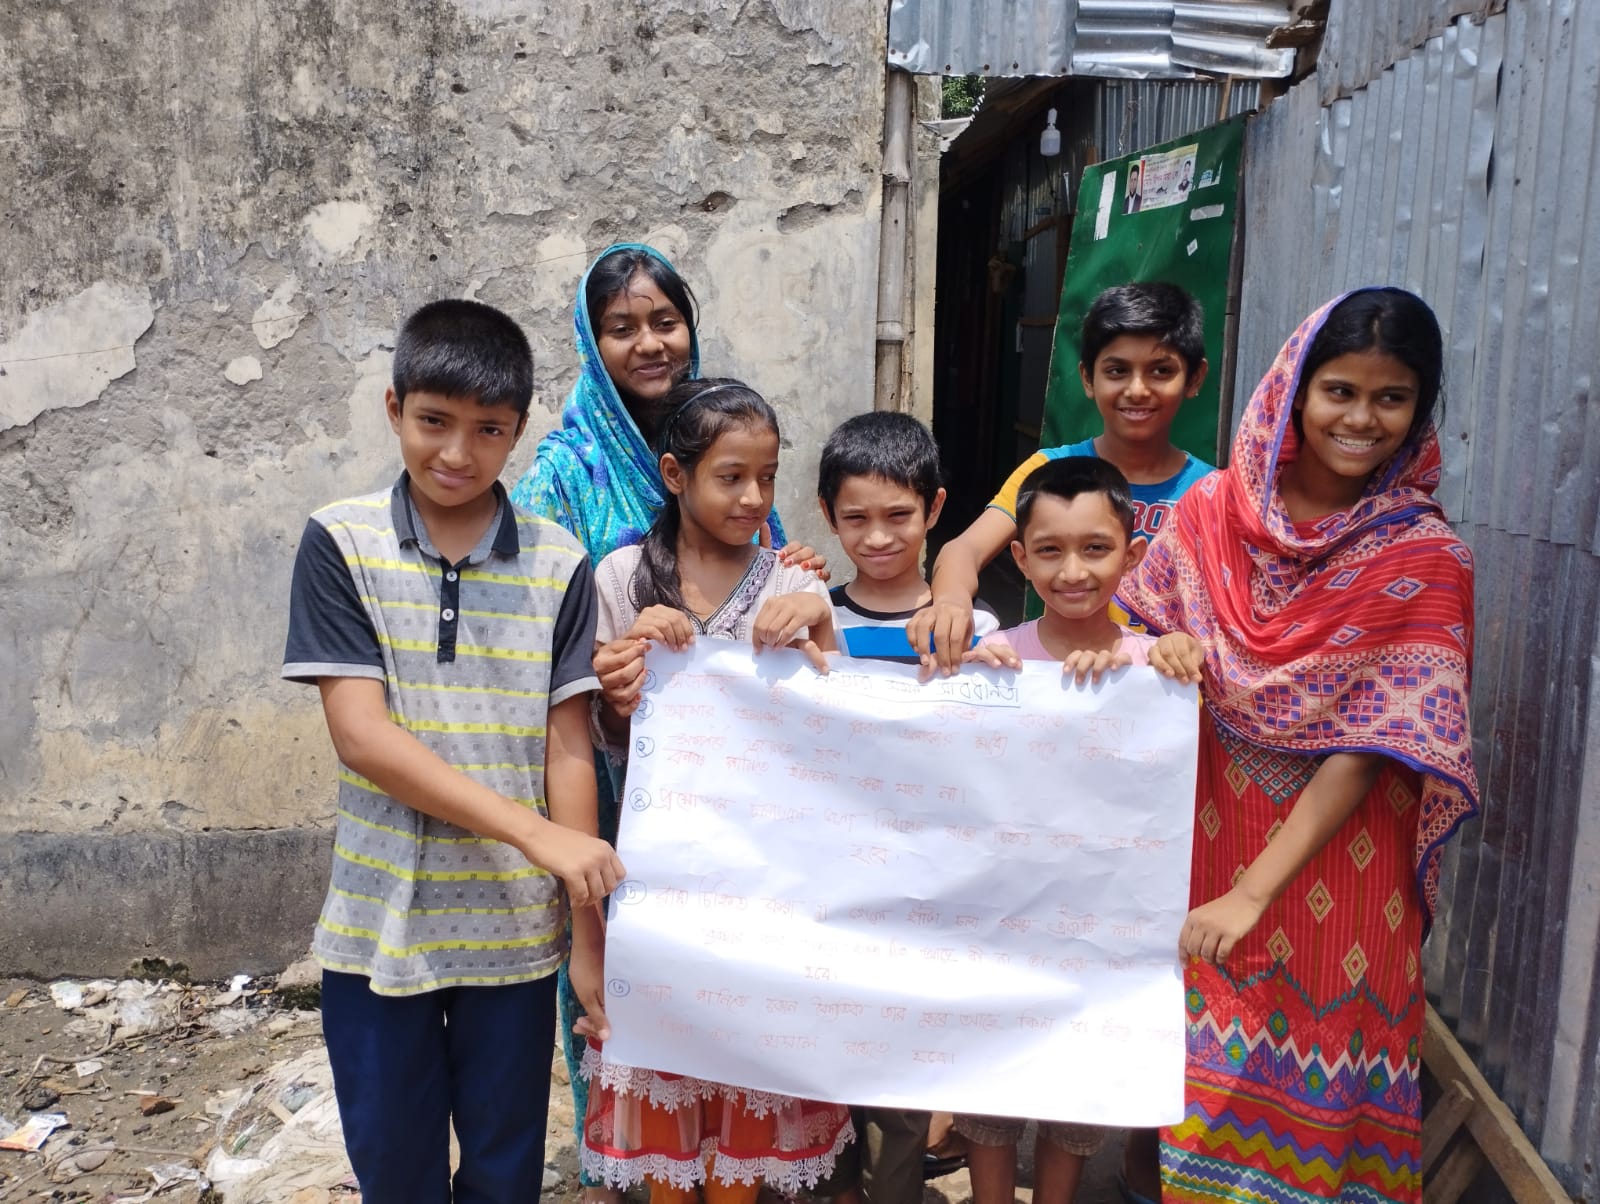 Children in Mohakhali made a poster on flood safety rules 2